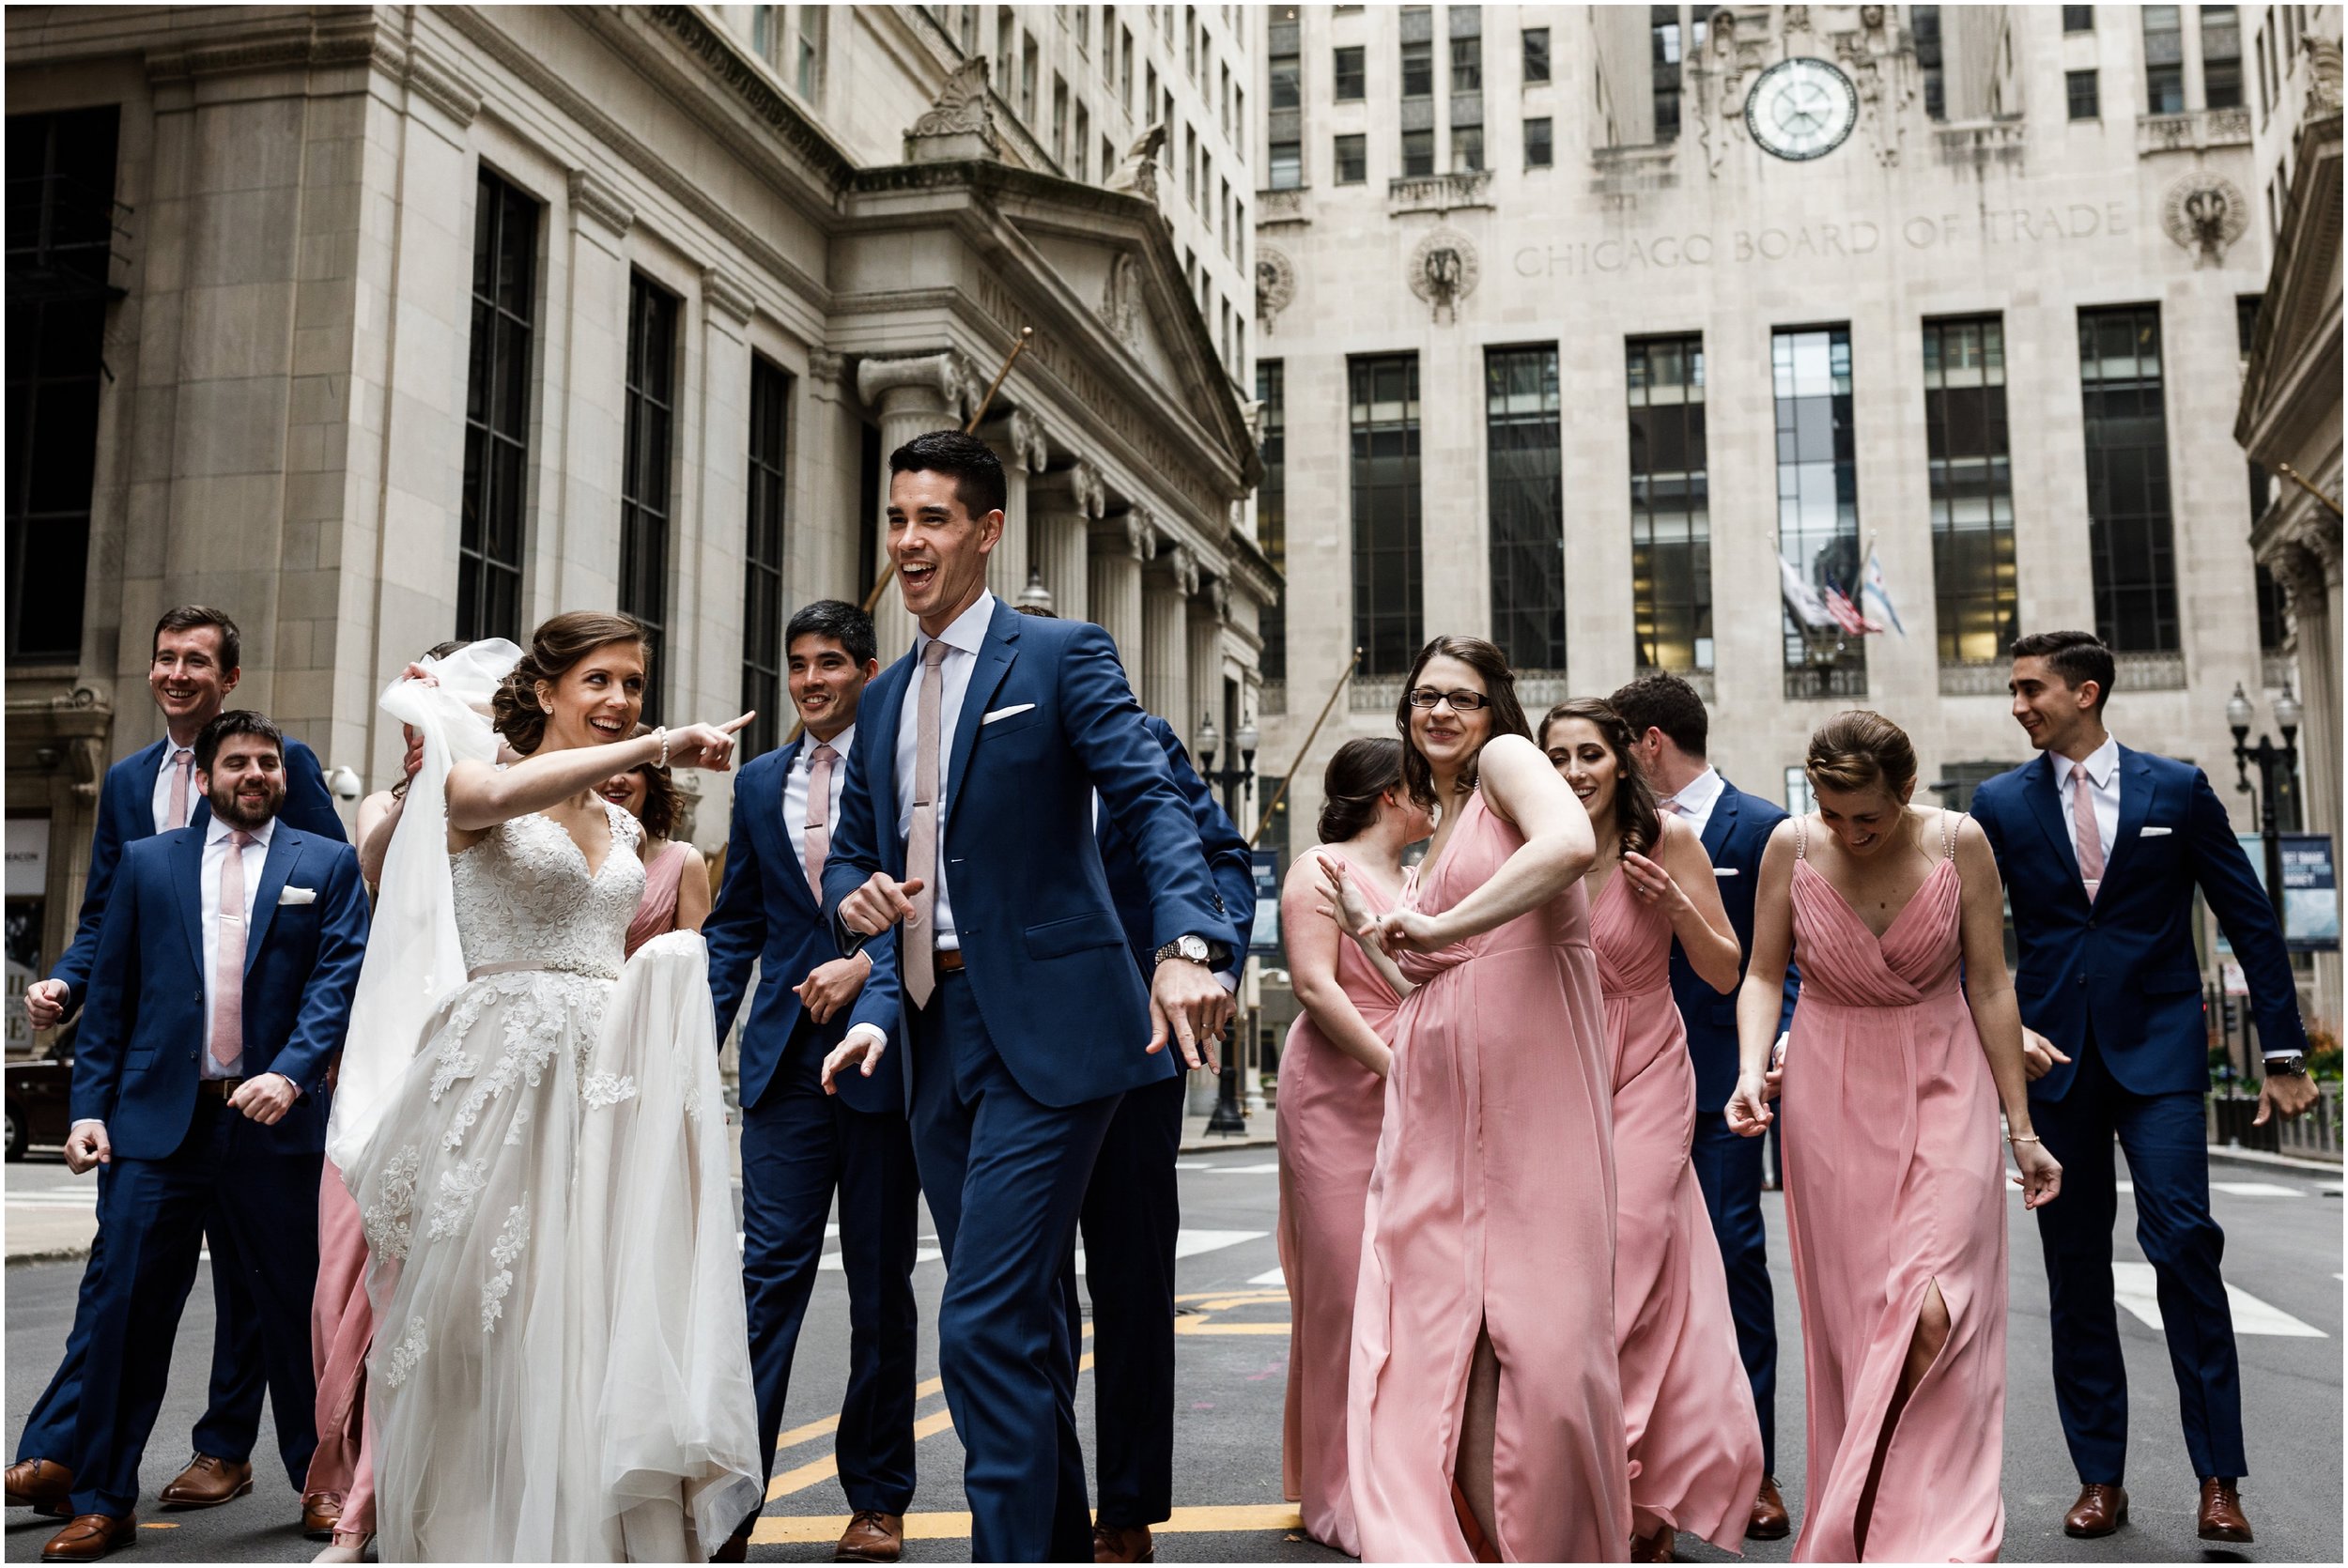 wedding party dancing in front of the Chicago Board of Trade